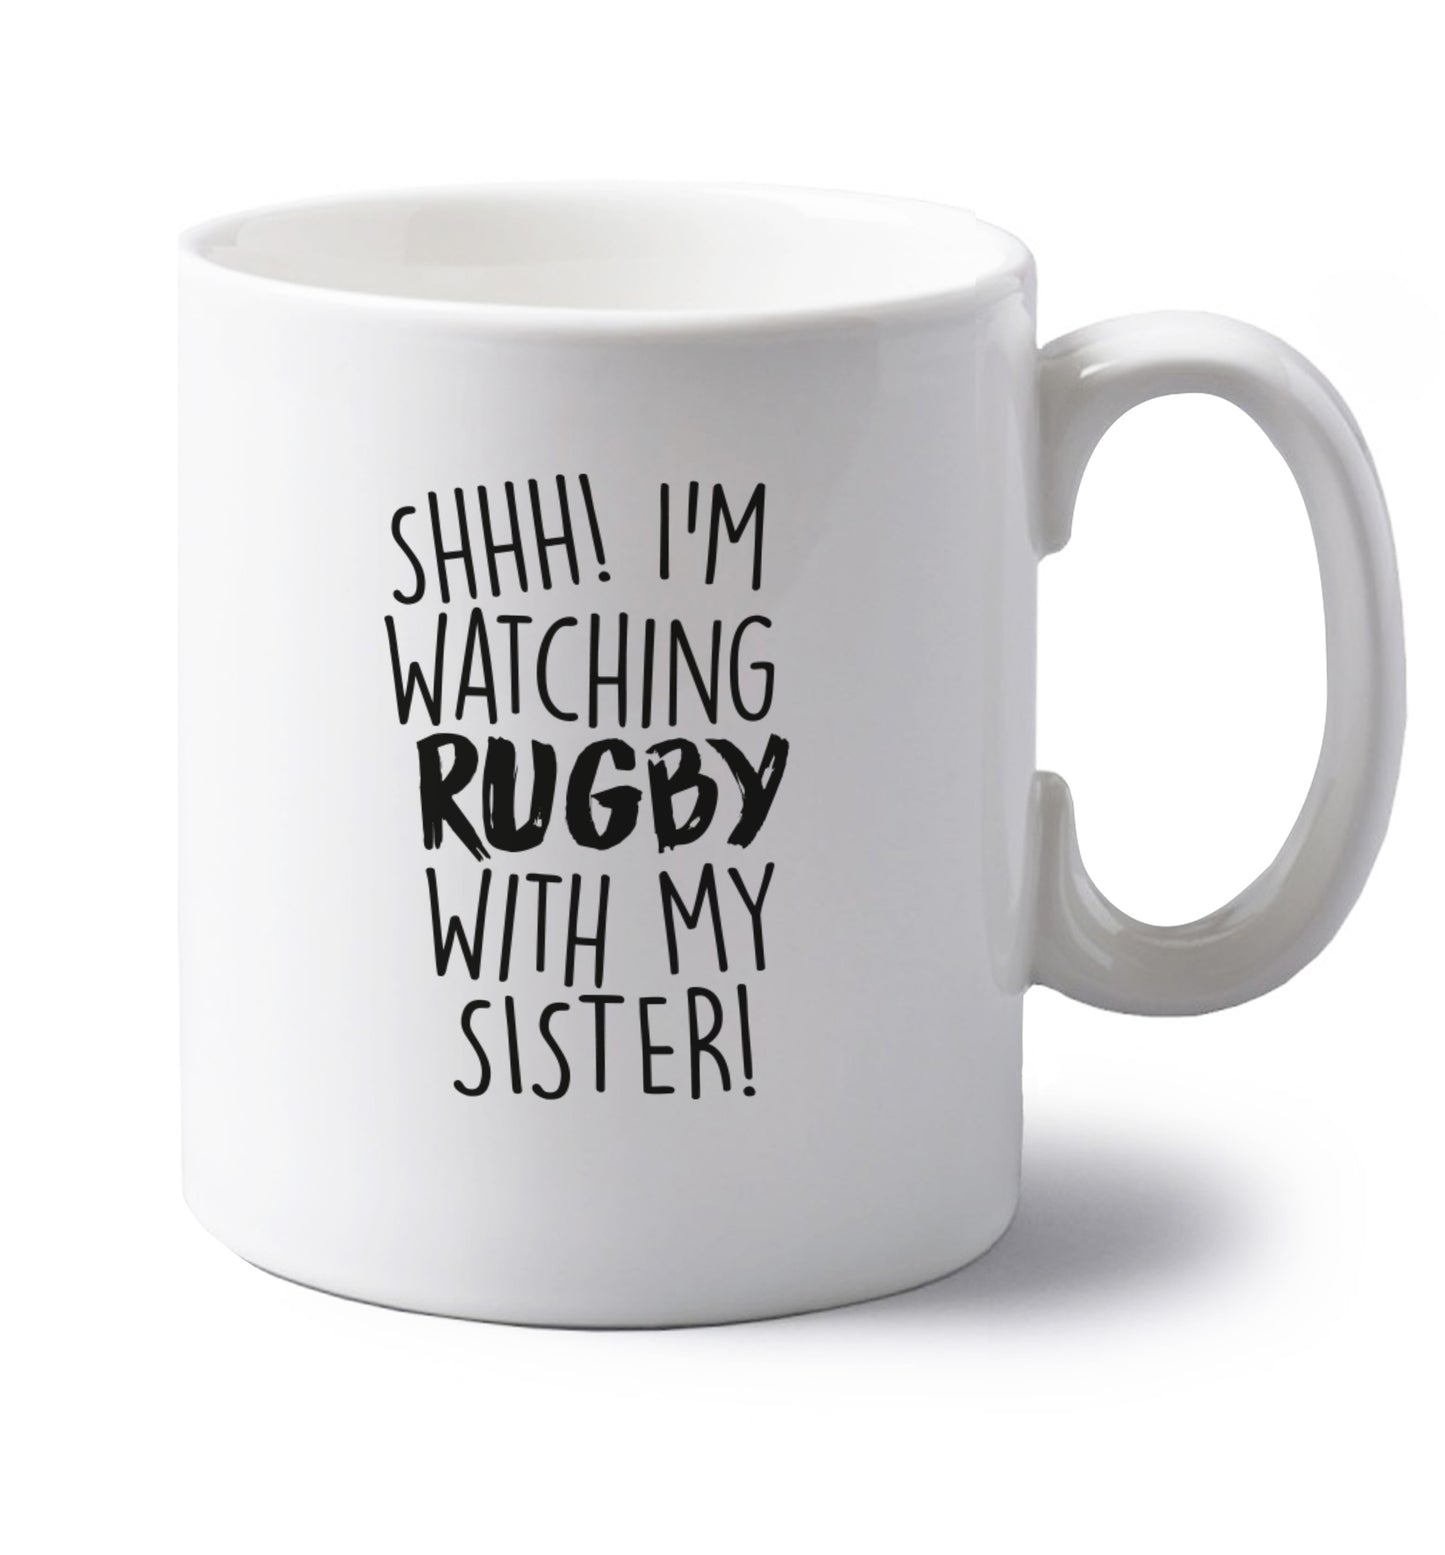 Shh... I'm watching rugby with my sister left handed white ceramic mug 